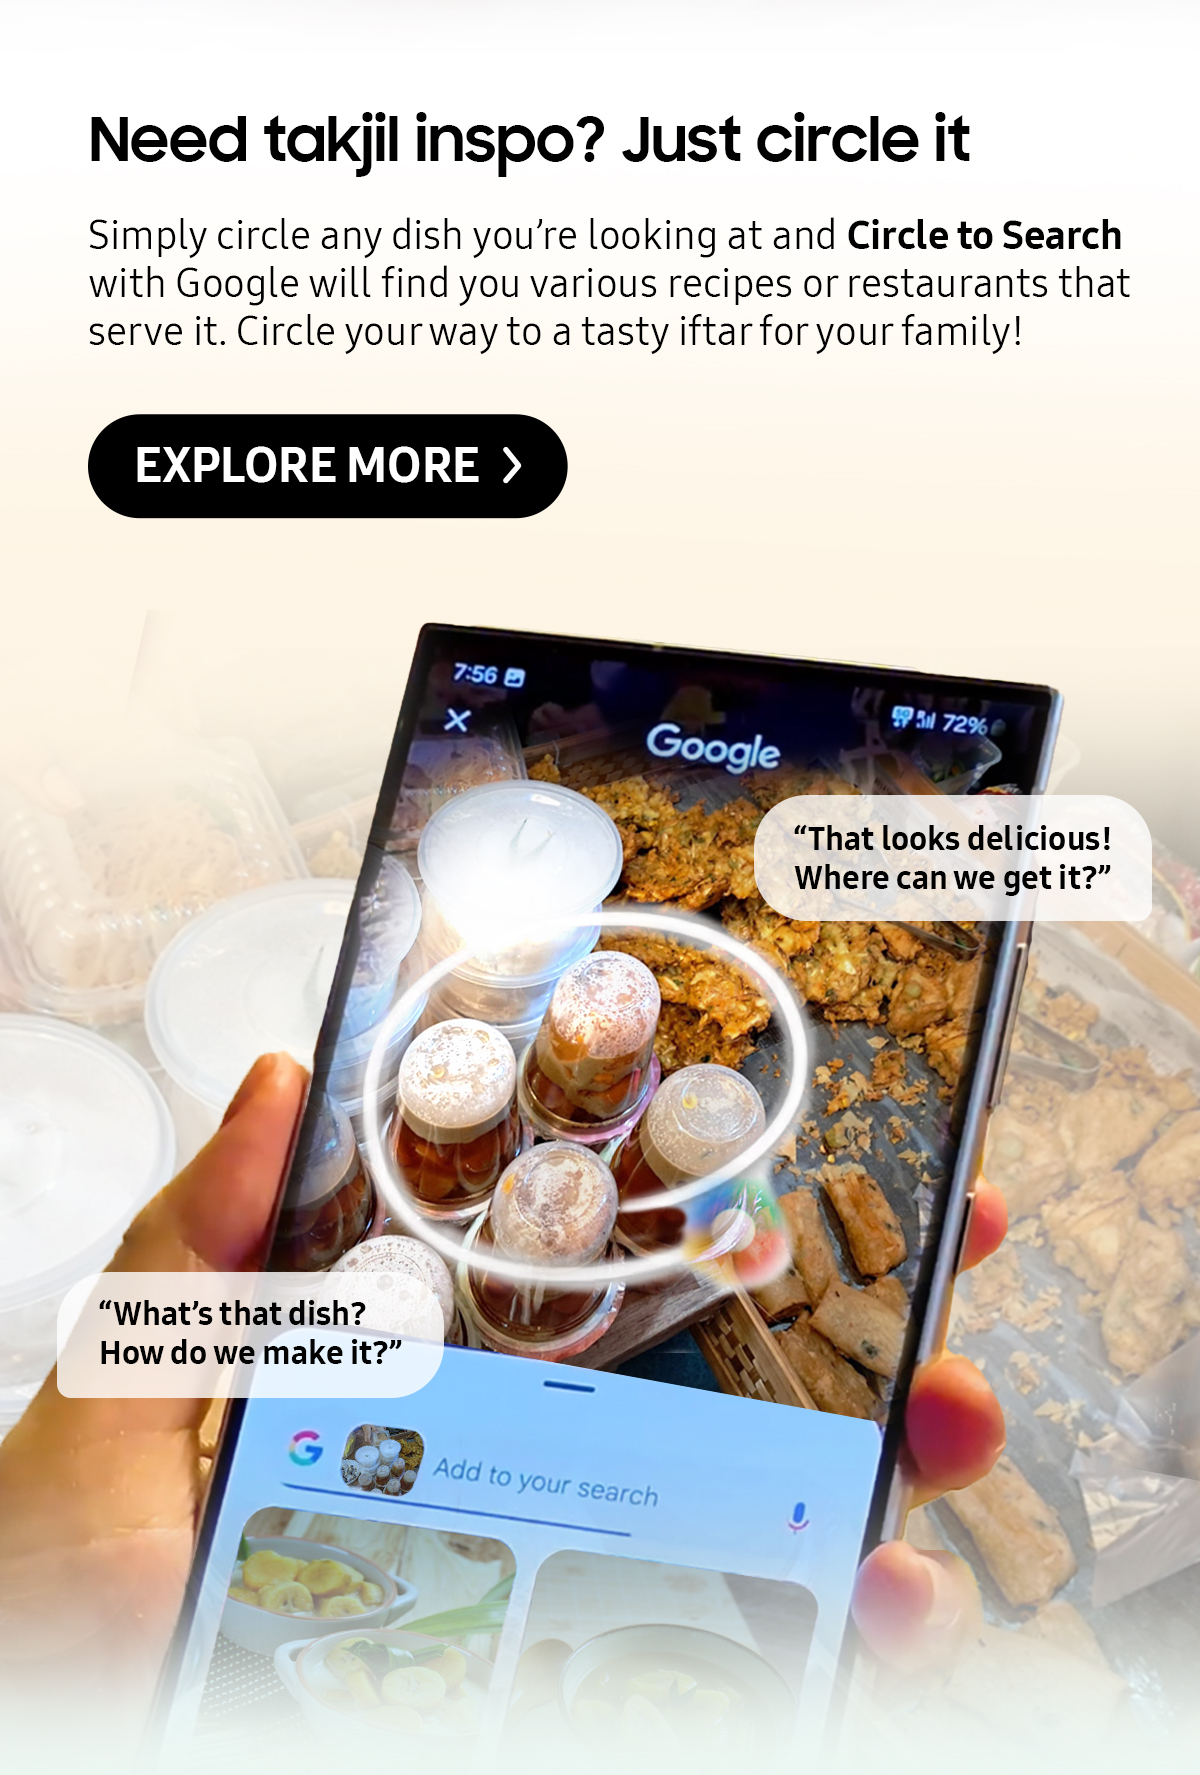 Need takjil inspo? Just circle it | Simply circle any dish you're looking at and Circle to Search with Google will find you various recipes or restaurants that serve it. Circle your way to a tasty iftar for your family!